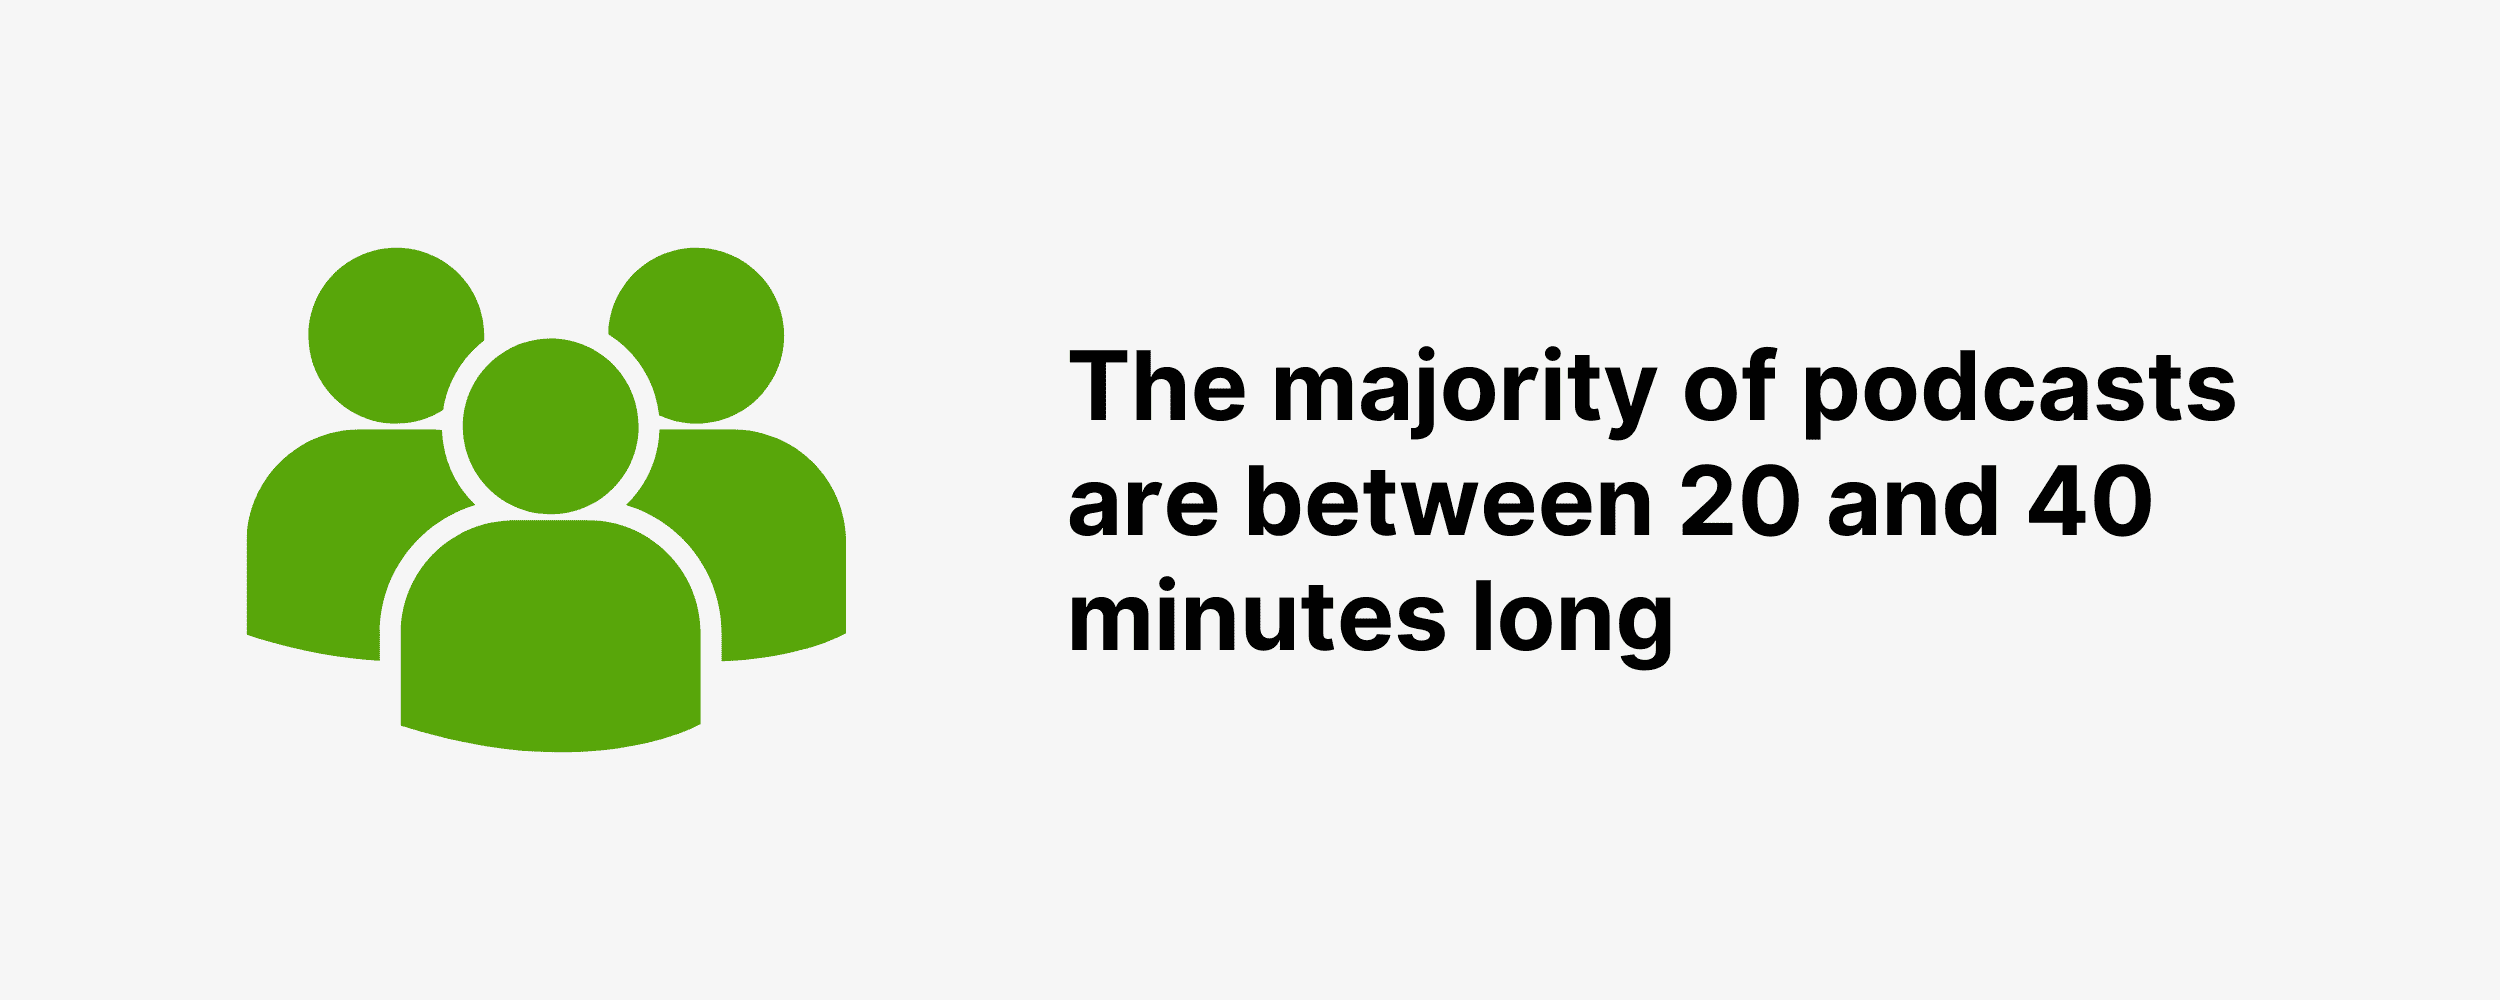 The majority of podcasts are between 20 and 40 minutes long